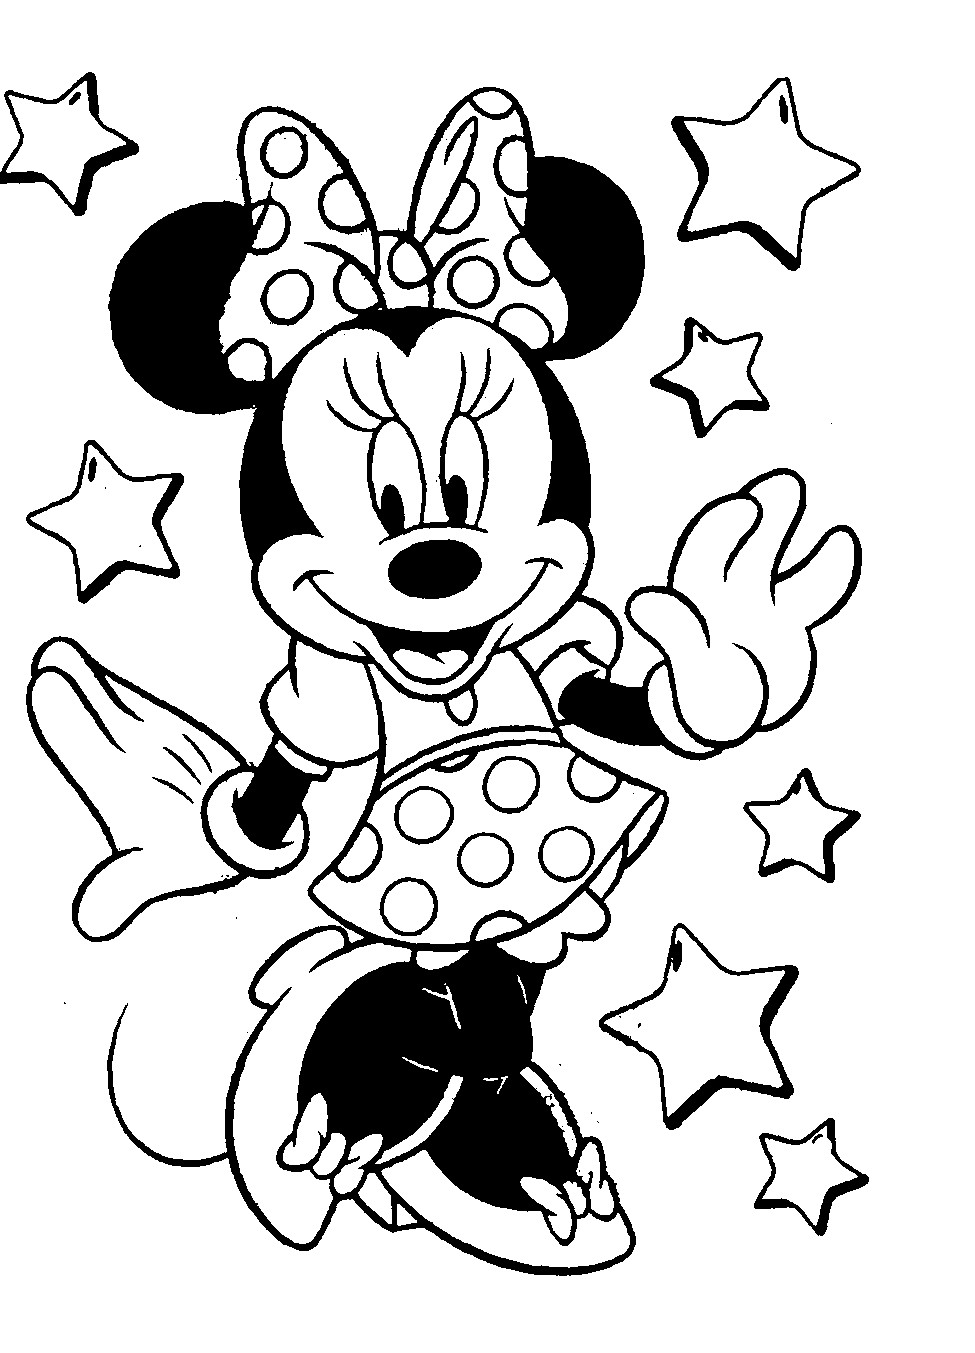 Minnie Mouse Coloring Pages Printable
 DISNEY VALENTINE COLORNG PAGES WITH MICKEY AND MINNIE